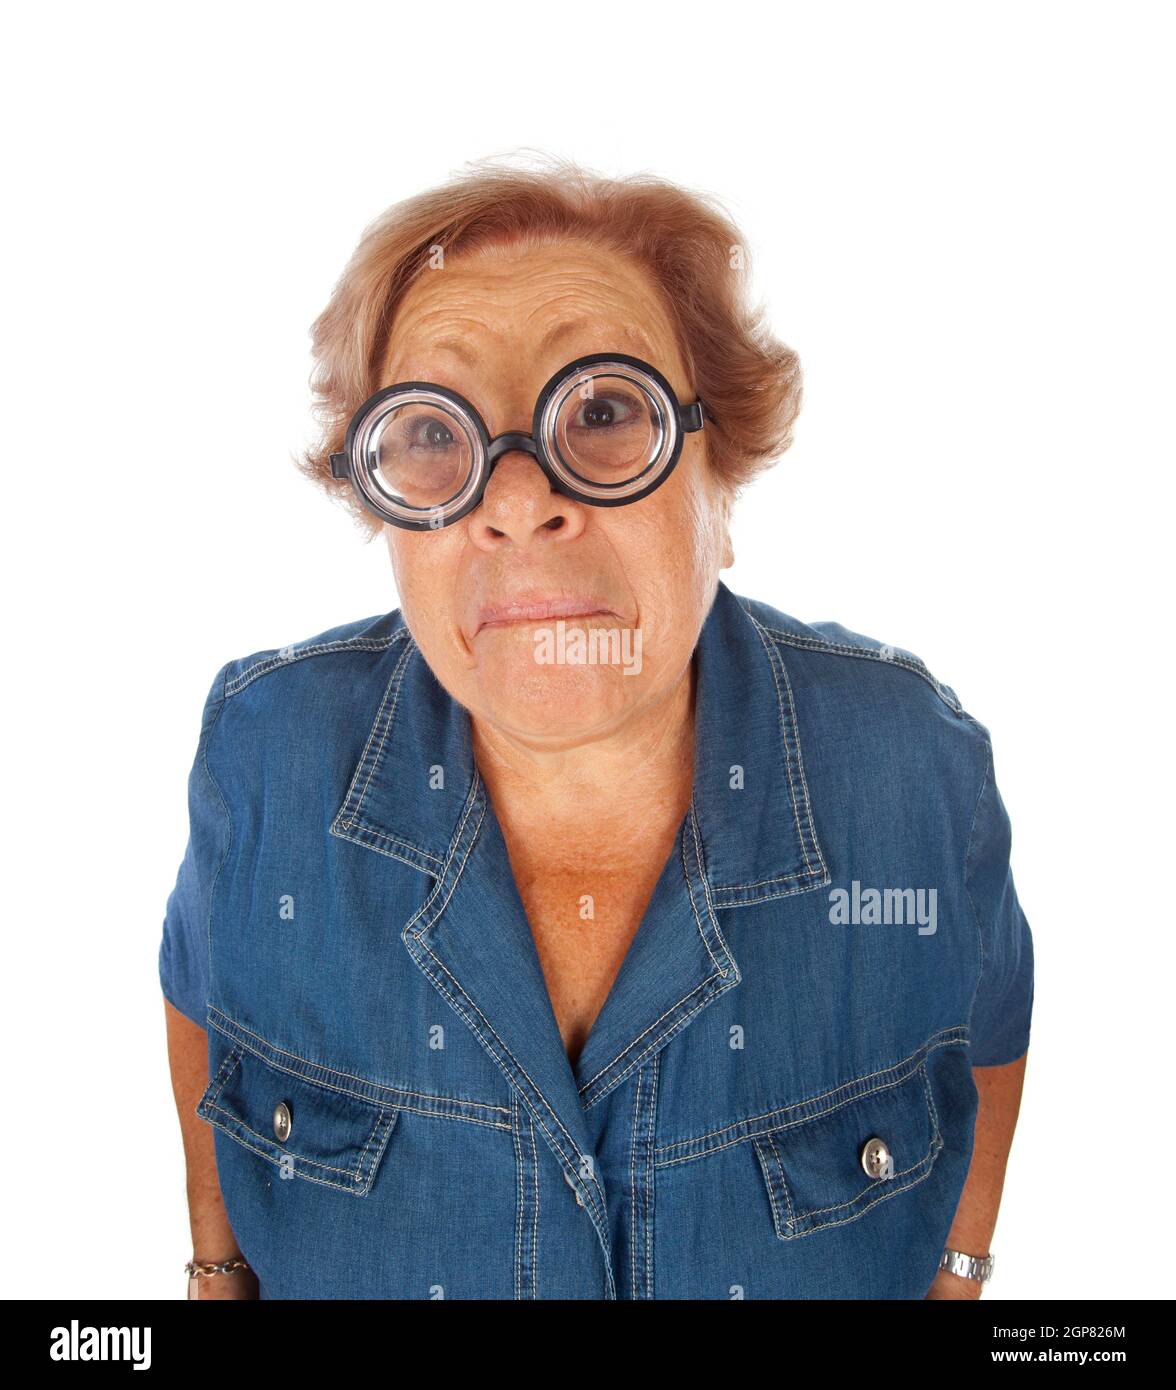 Thick Glasses Funny High Resolution Stock Photography and Images - Alamy